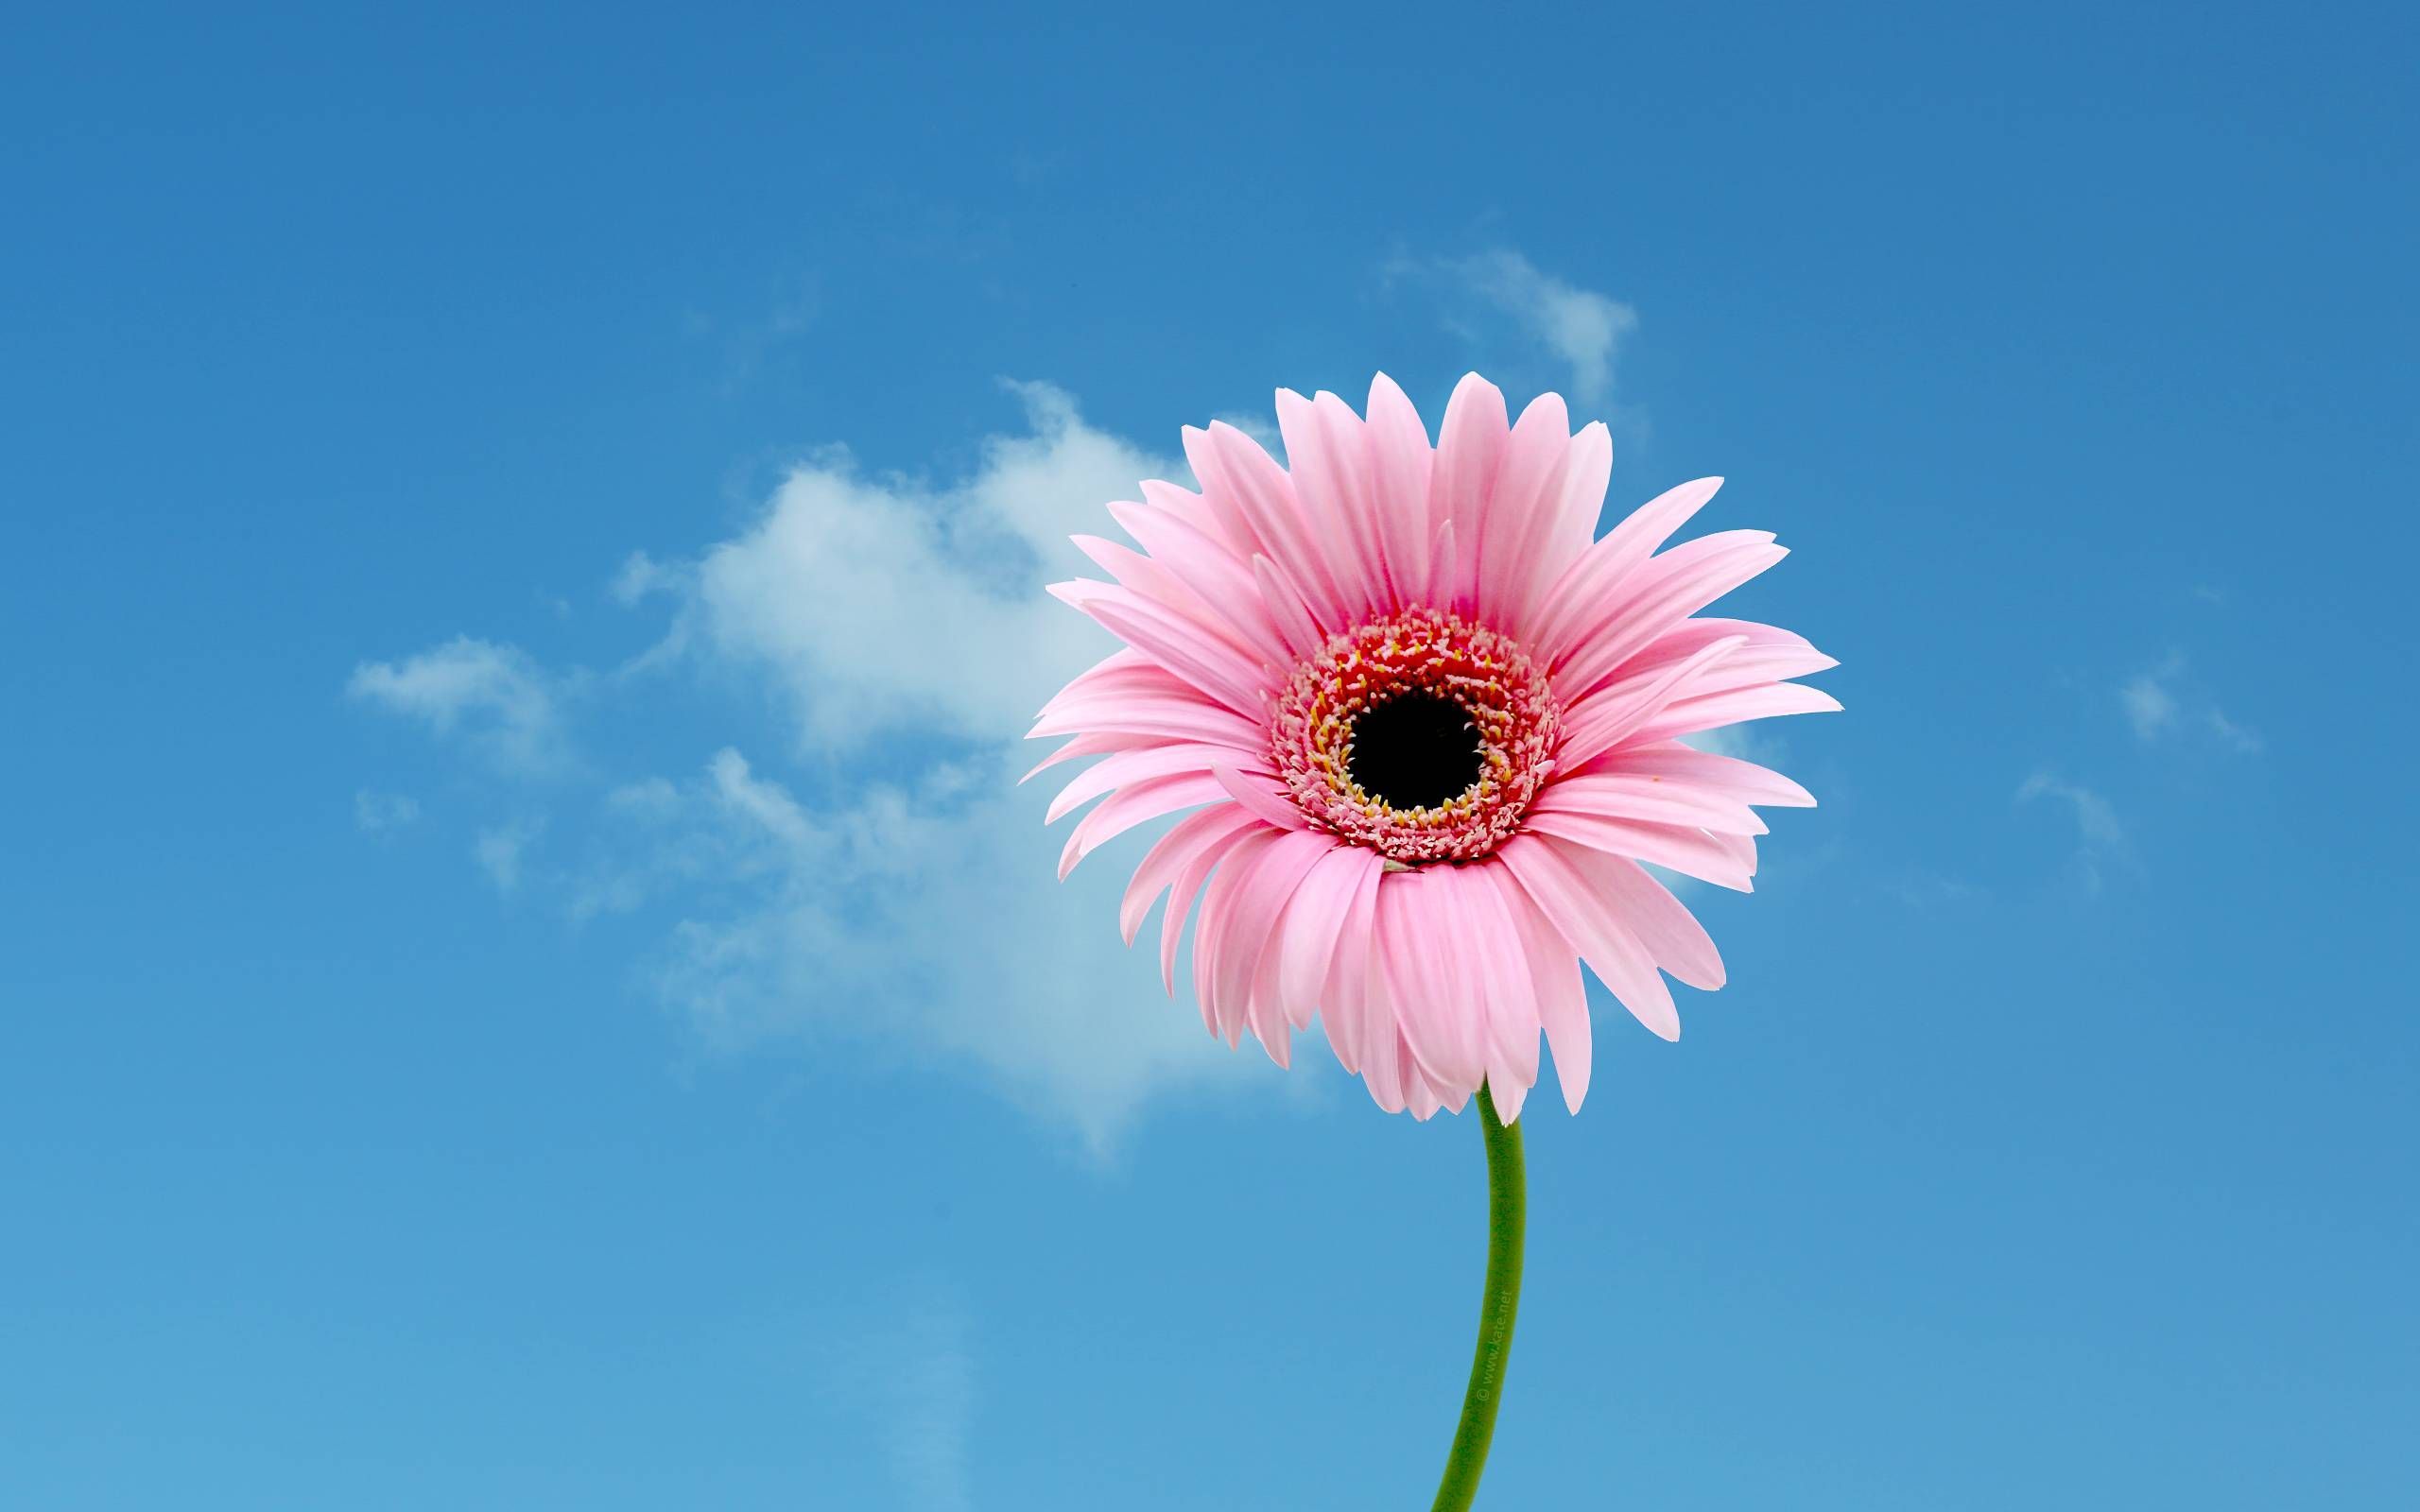 Pink Daisy Flower Wallpaper Photo. Happy mothers day image, Mother's day background, Happy mothers day wallpaper